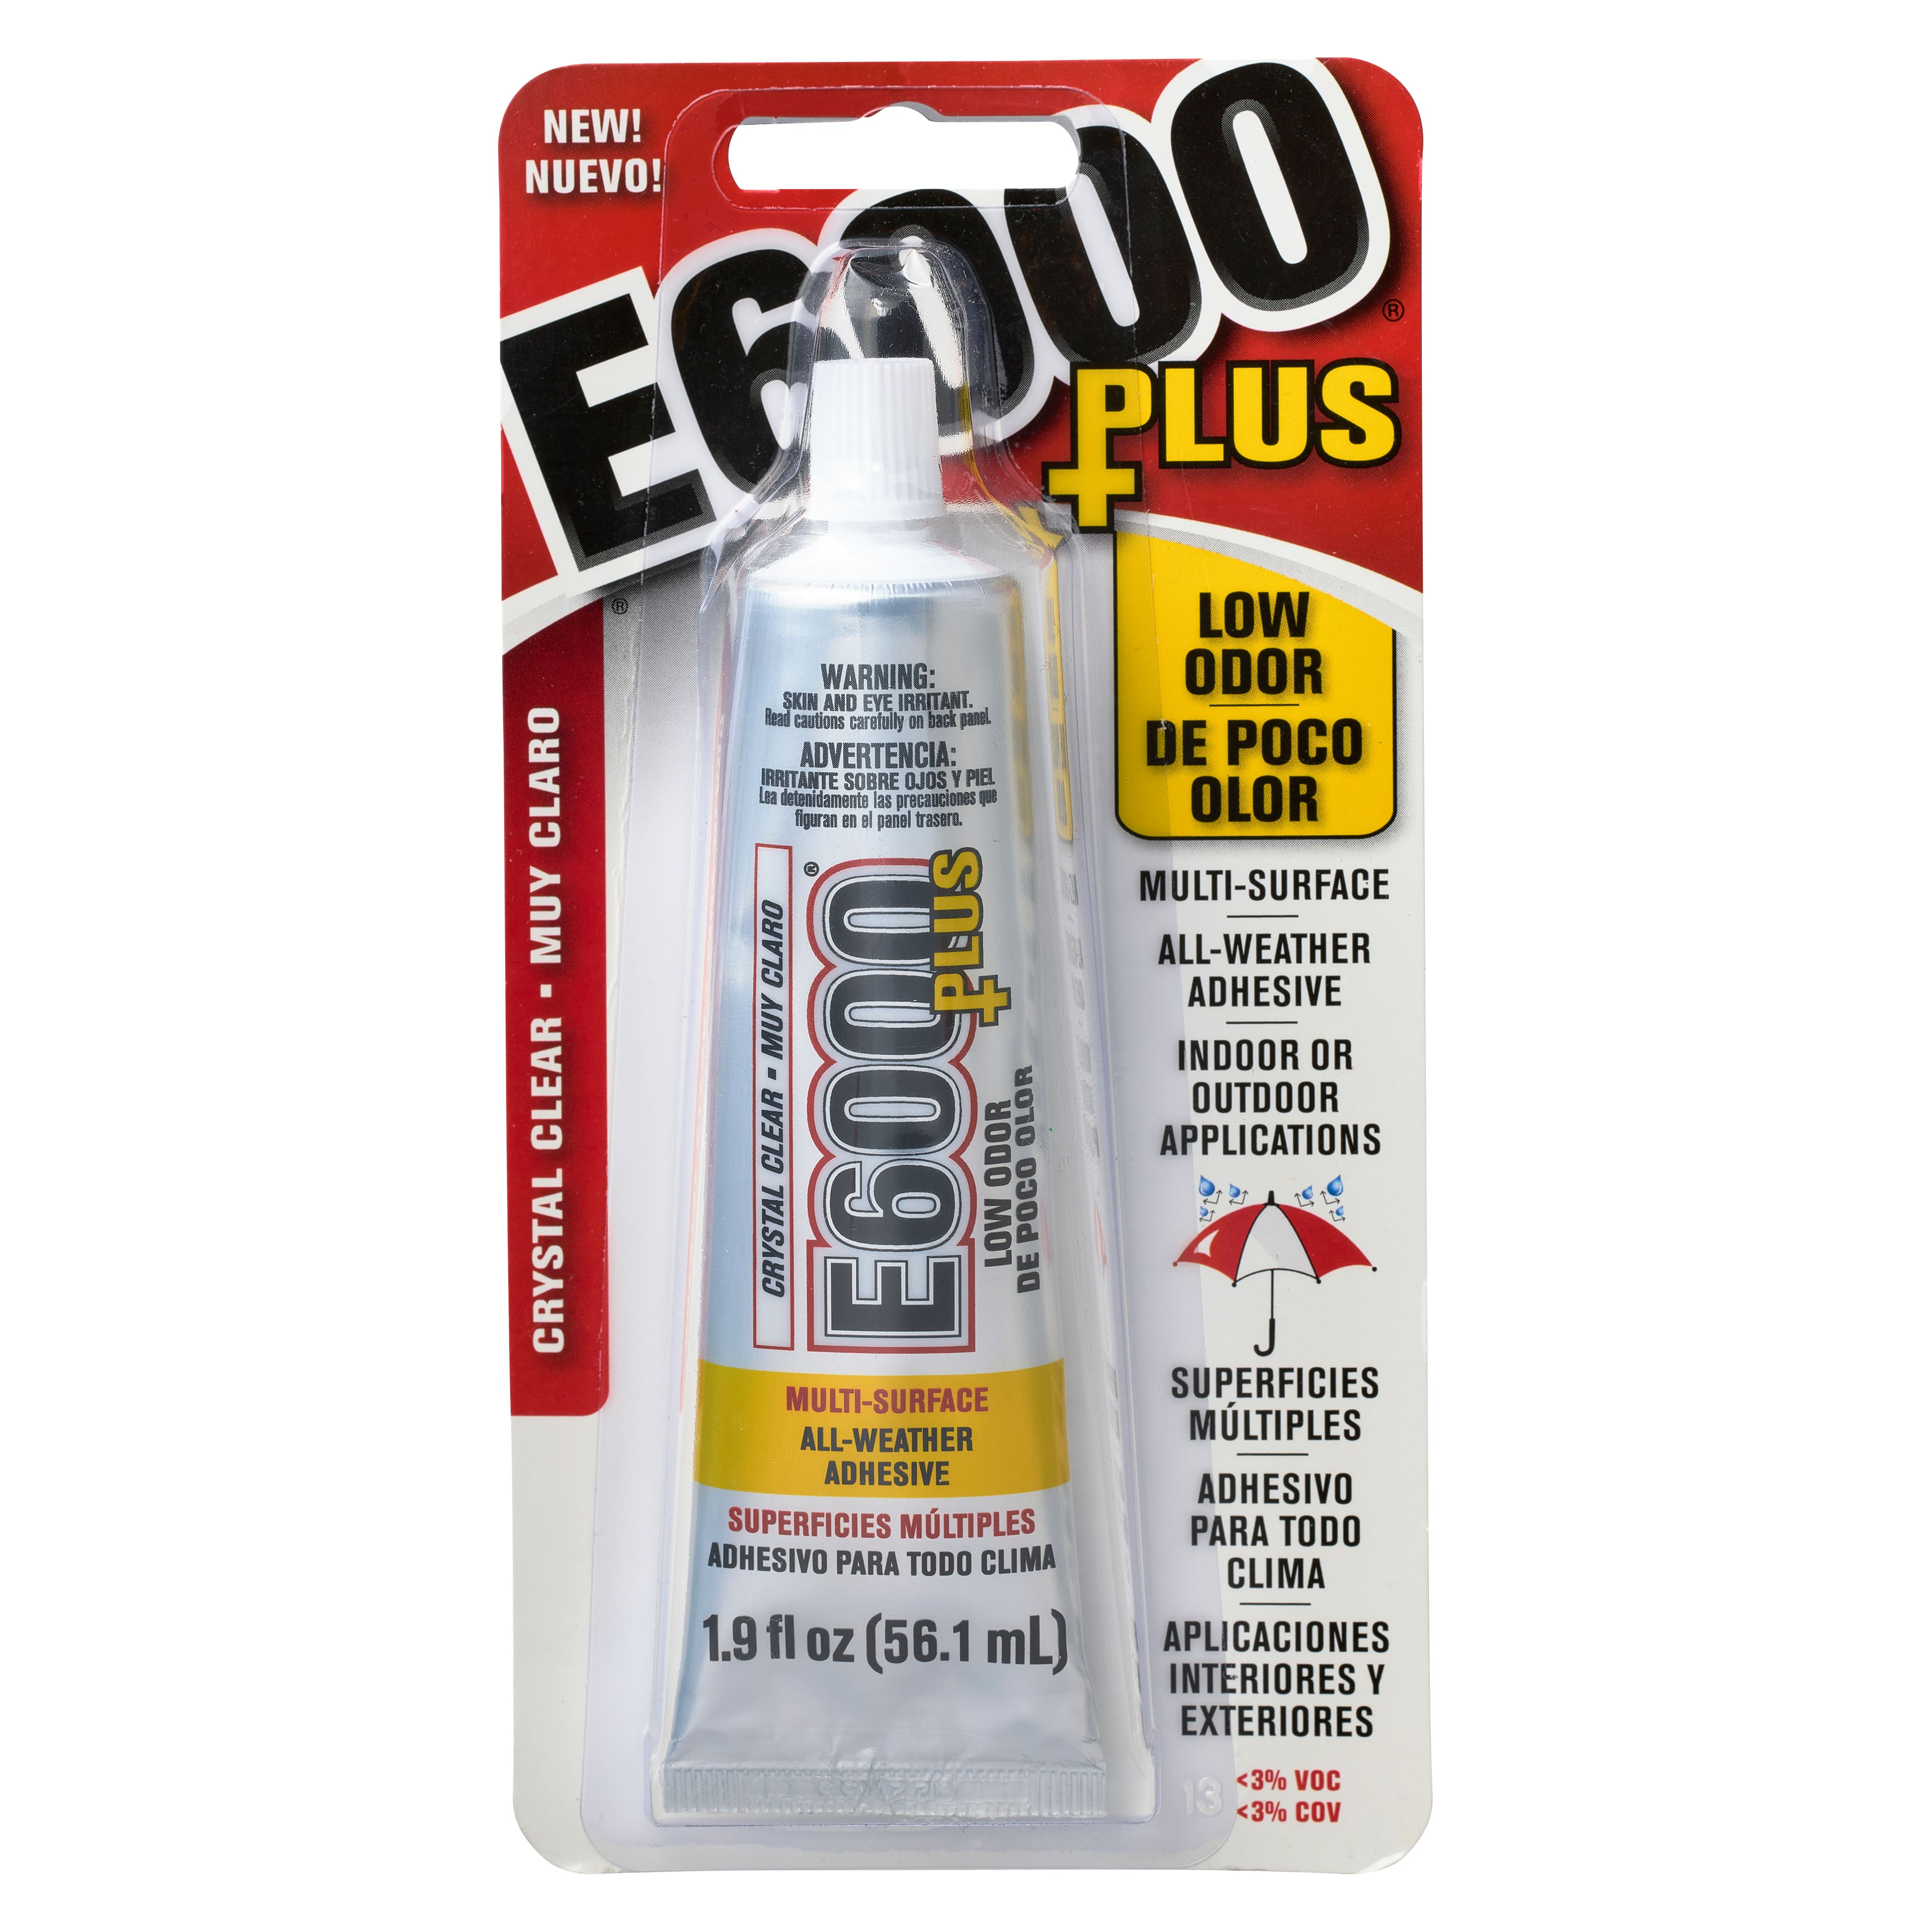 E6000&#xAE; Plus Crystal Clear All-Weather Adhesive